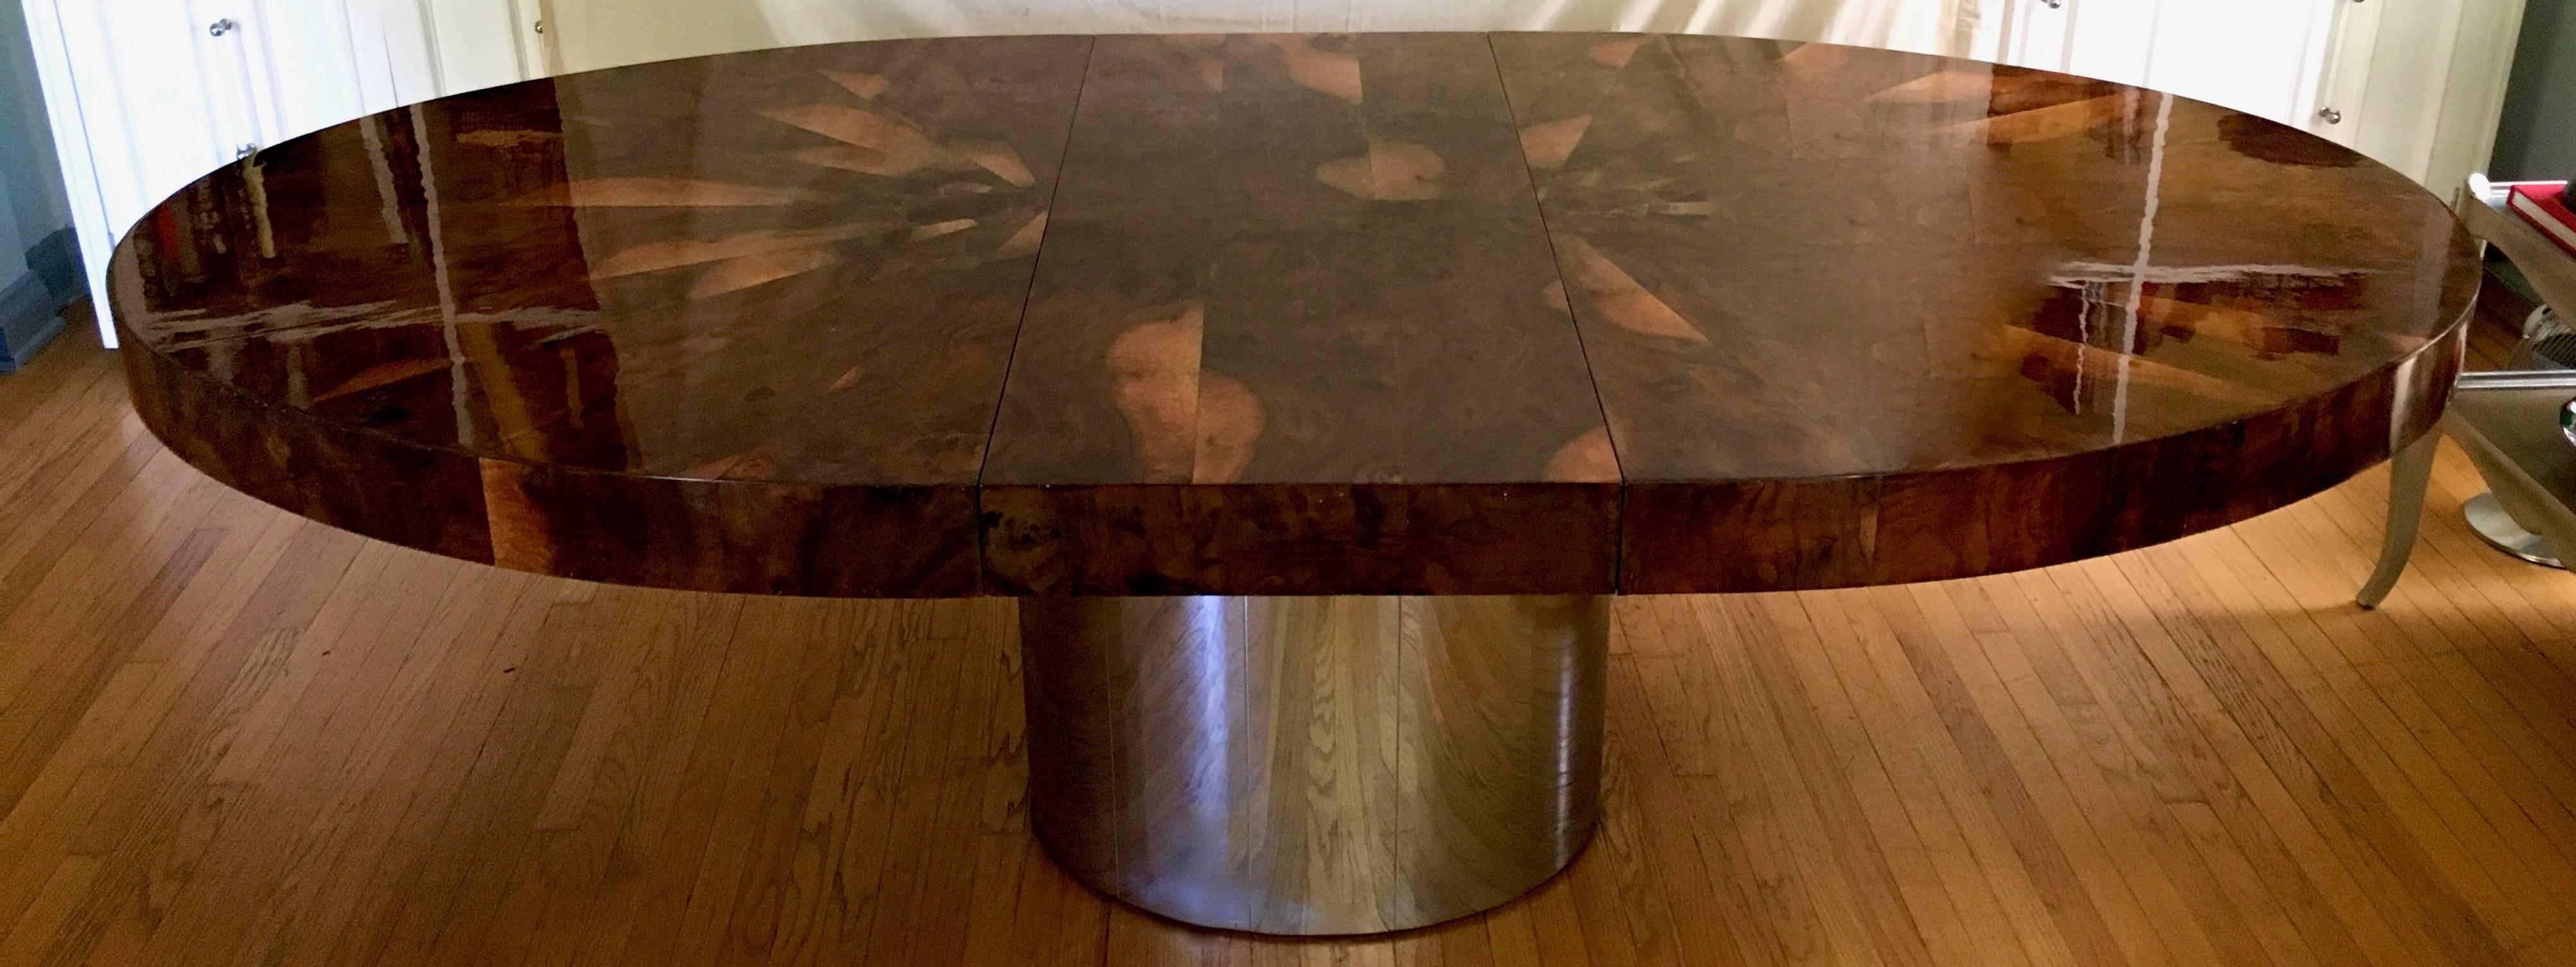 Iconic Paul Evan's dining race track dining table in dark matched burl top, with chrome base.

The dark burl and highly stunning polished top, while designed almost 50 years ago is very relevant and trending with today's color schemes and metal the